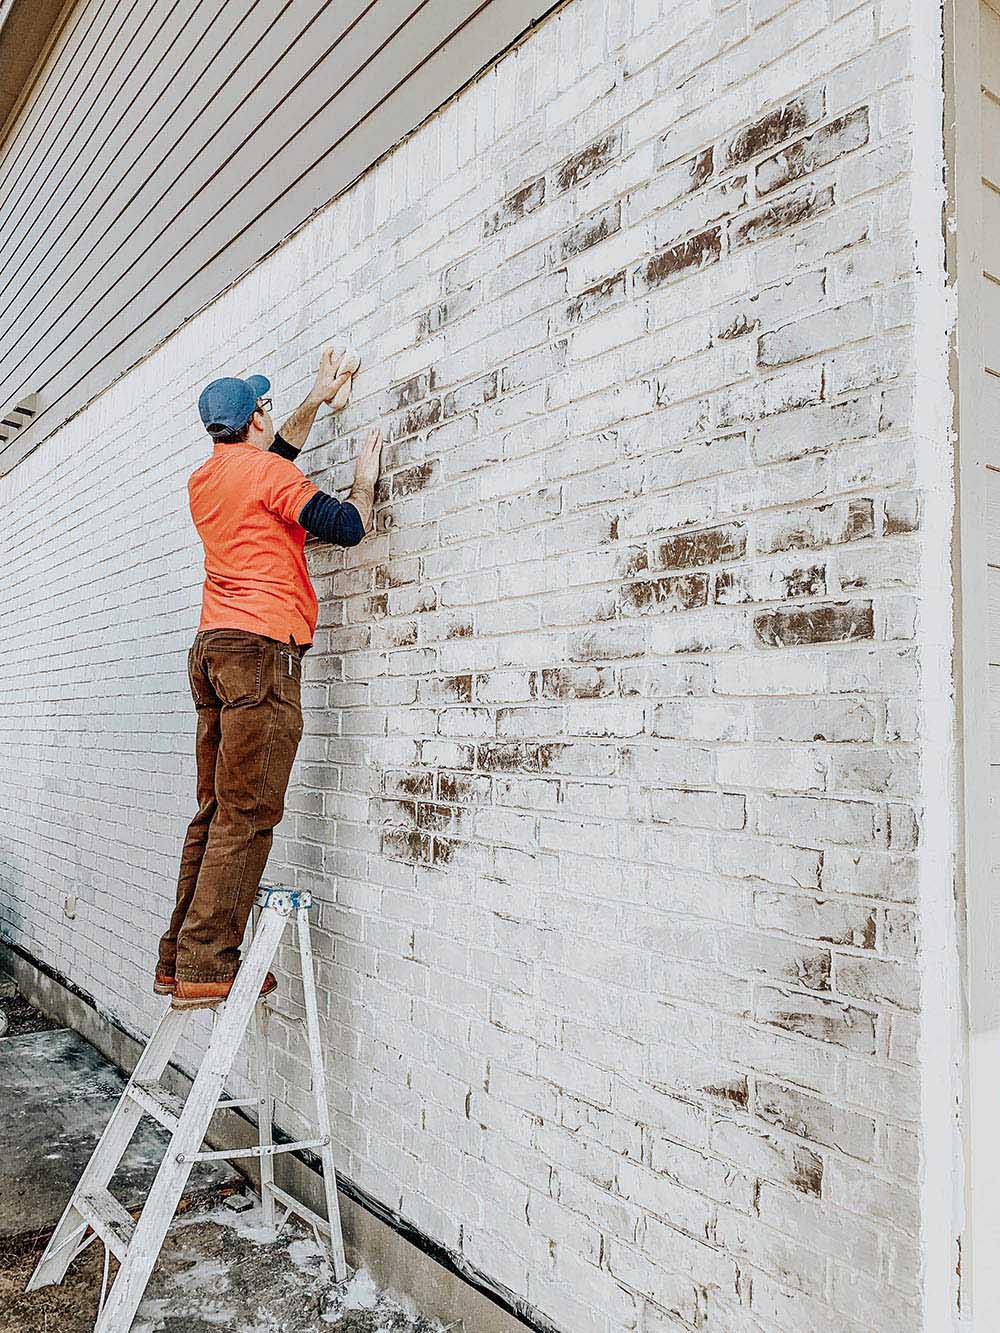 A man standing on a ladder applies classico limewash to a home's exterior.